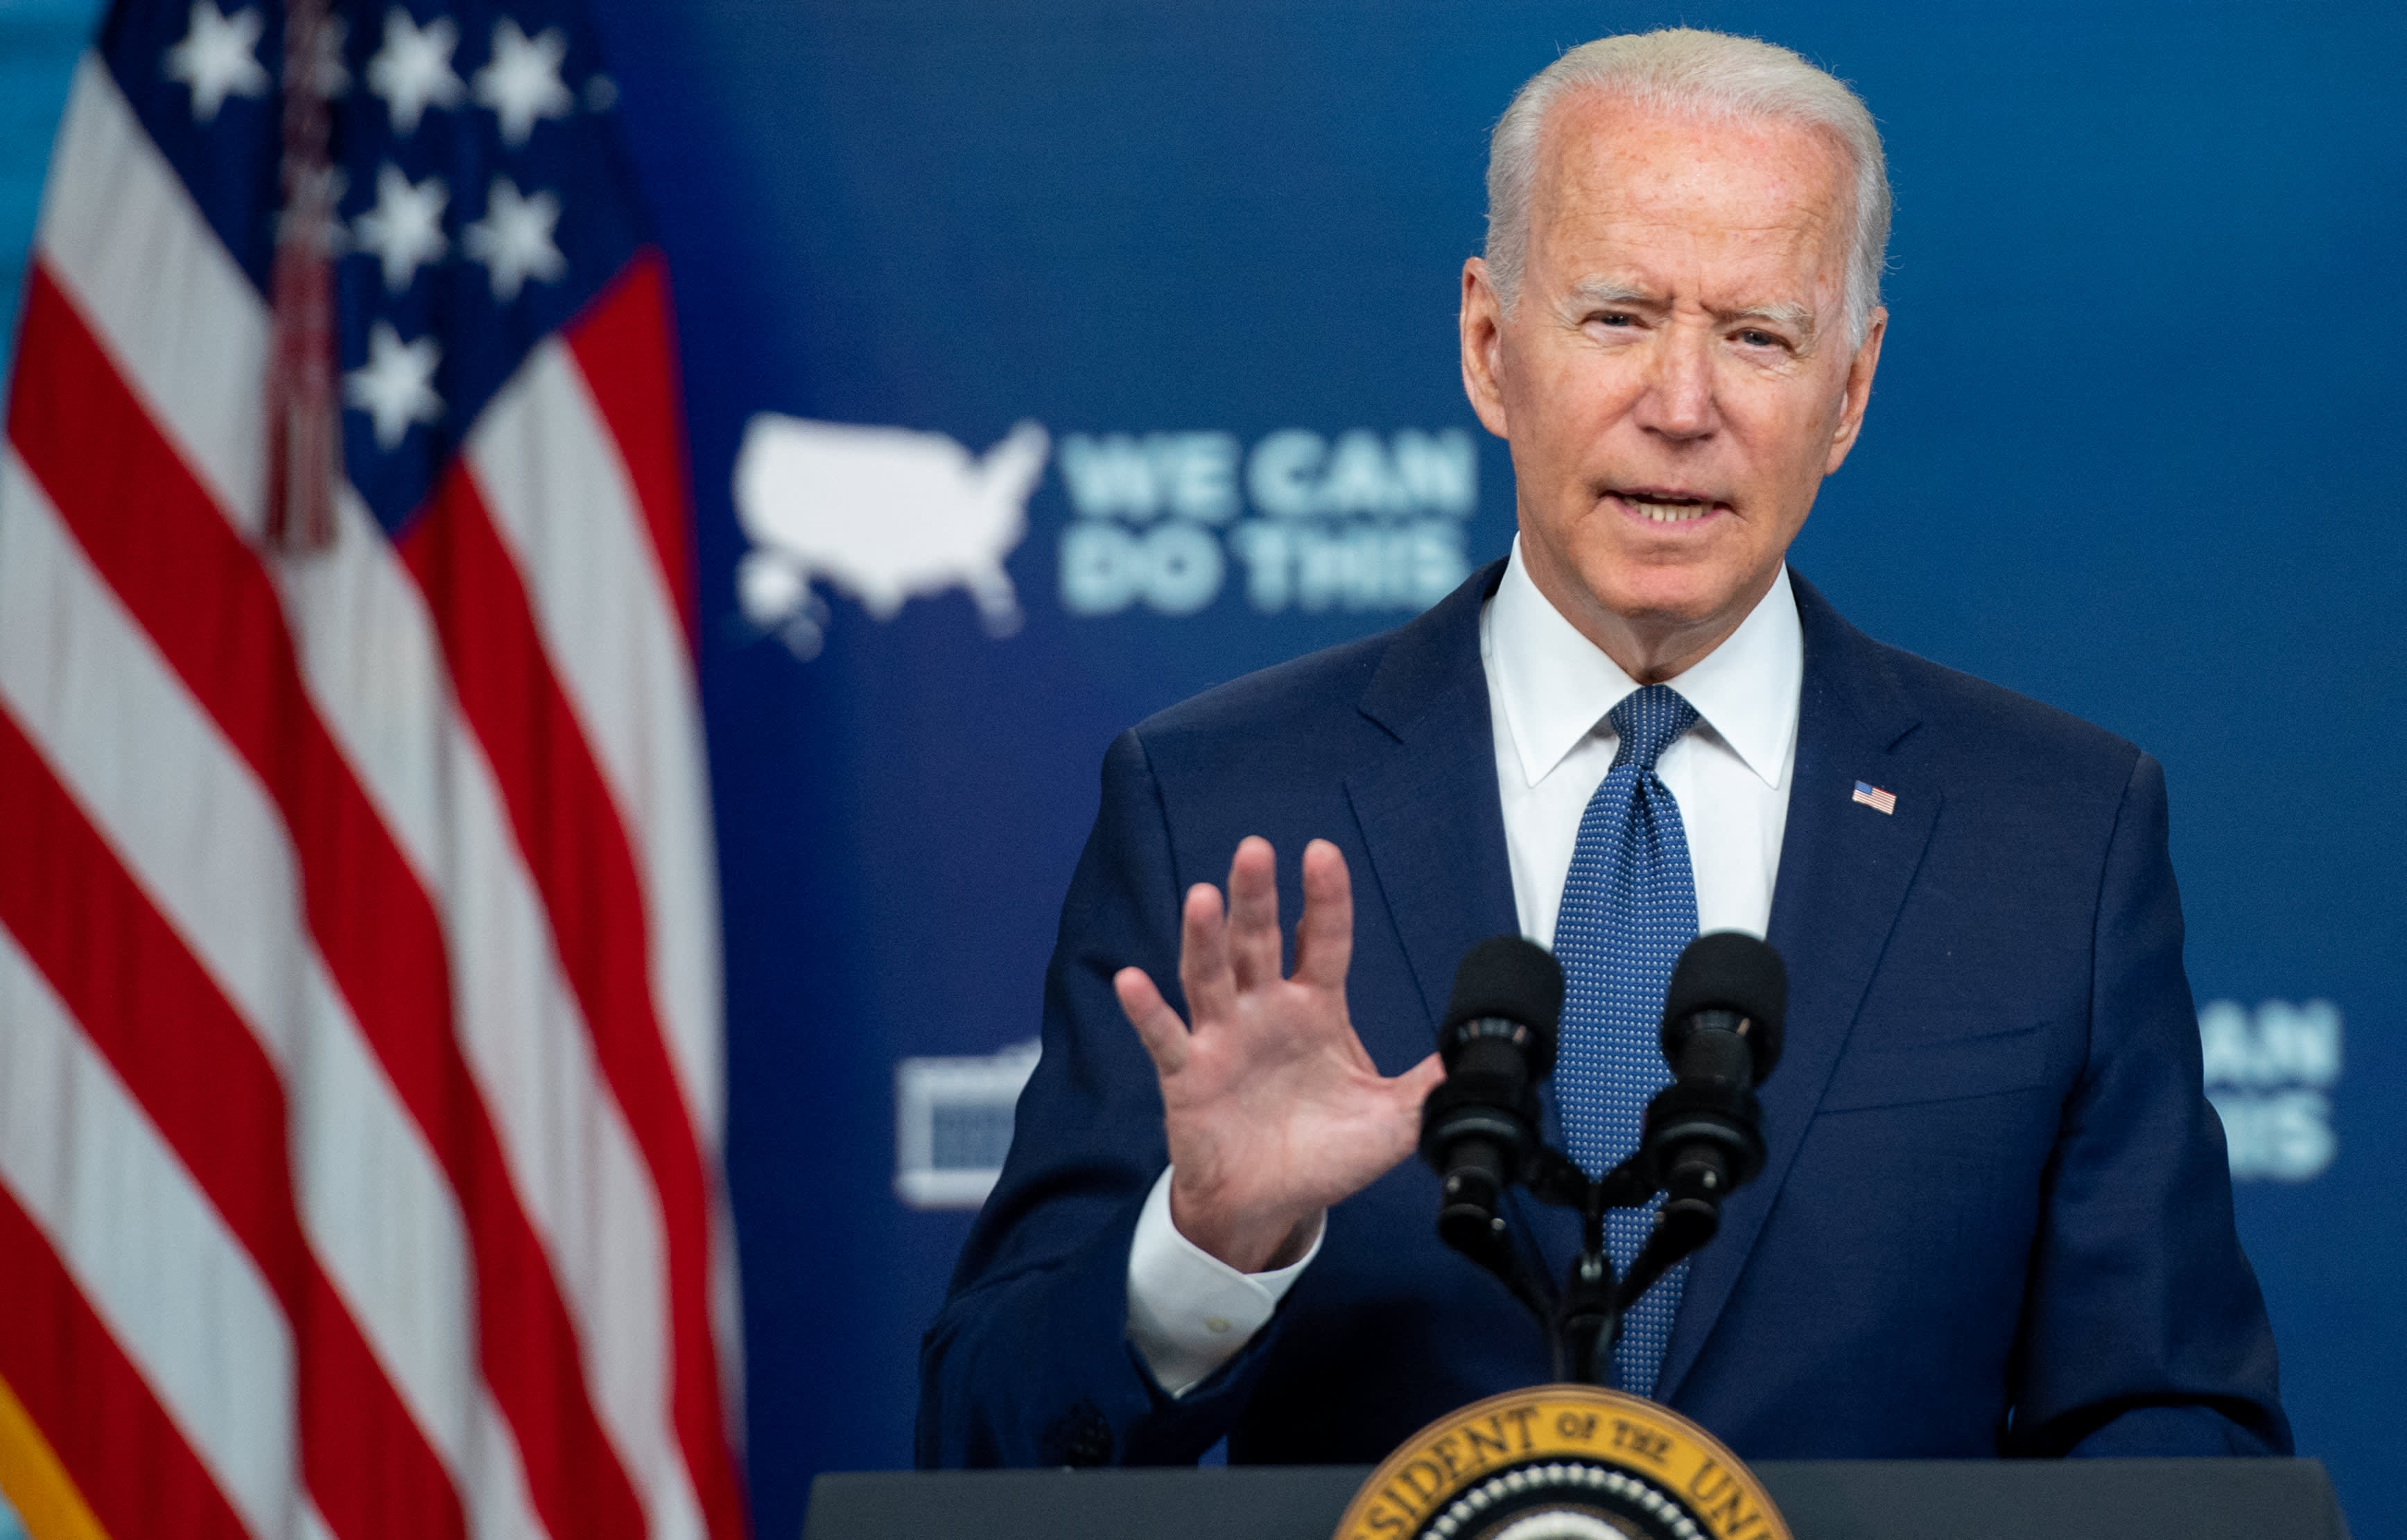 Biden will require federal workers to get the Covid vaccine or submit to testing